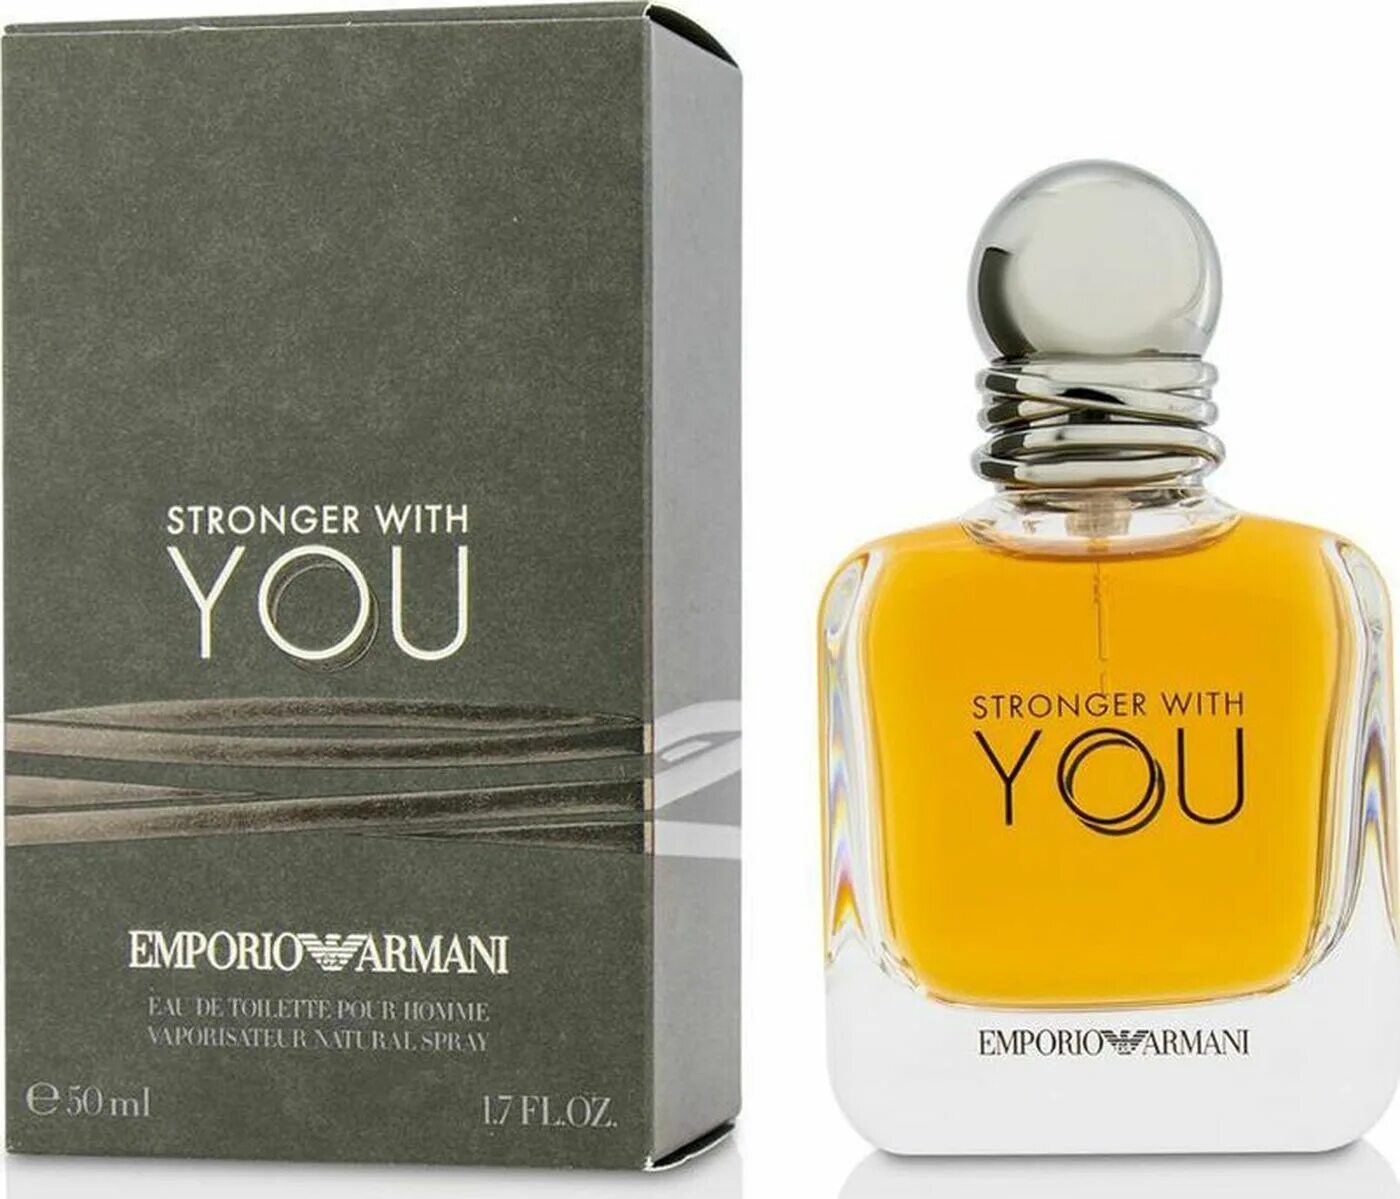 Stronger with you only. Туалетная вода Emporio Armani stronger with you. Туалетная вода Armani Emporio Armani stronger with you. Туалетная вода мужская stronger with you Армани. Emporio Armani духи мужские stronger with you.